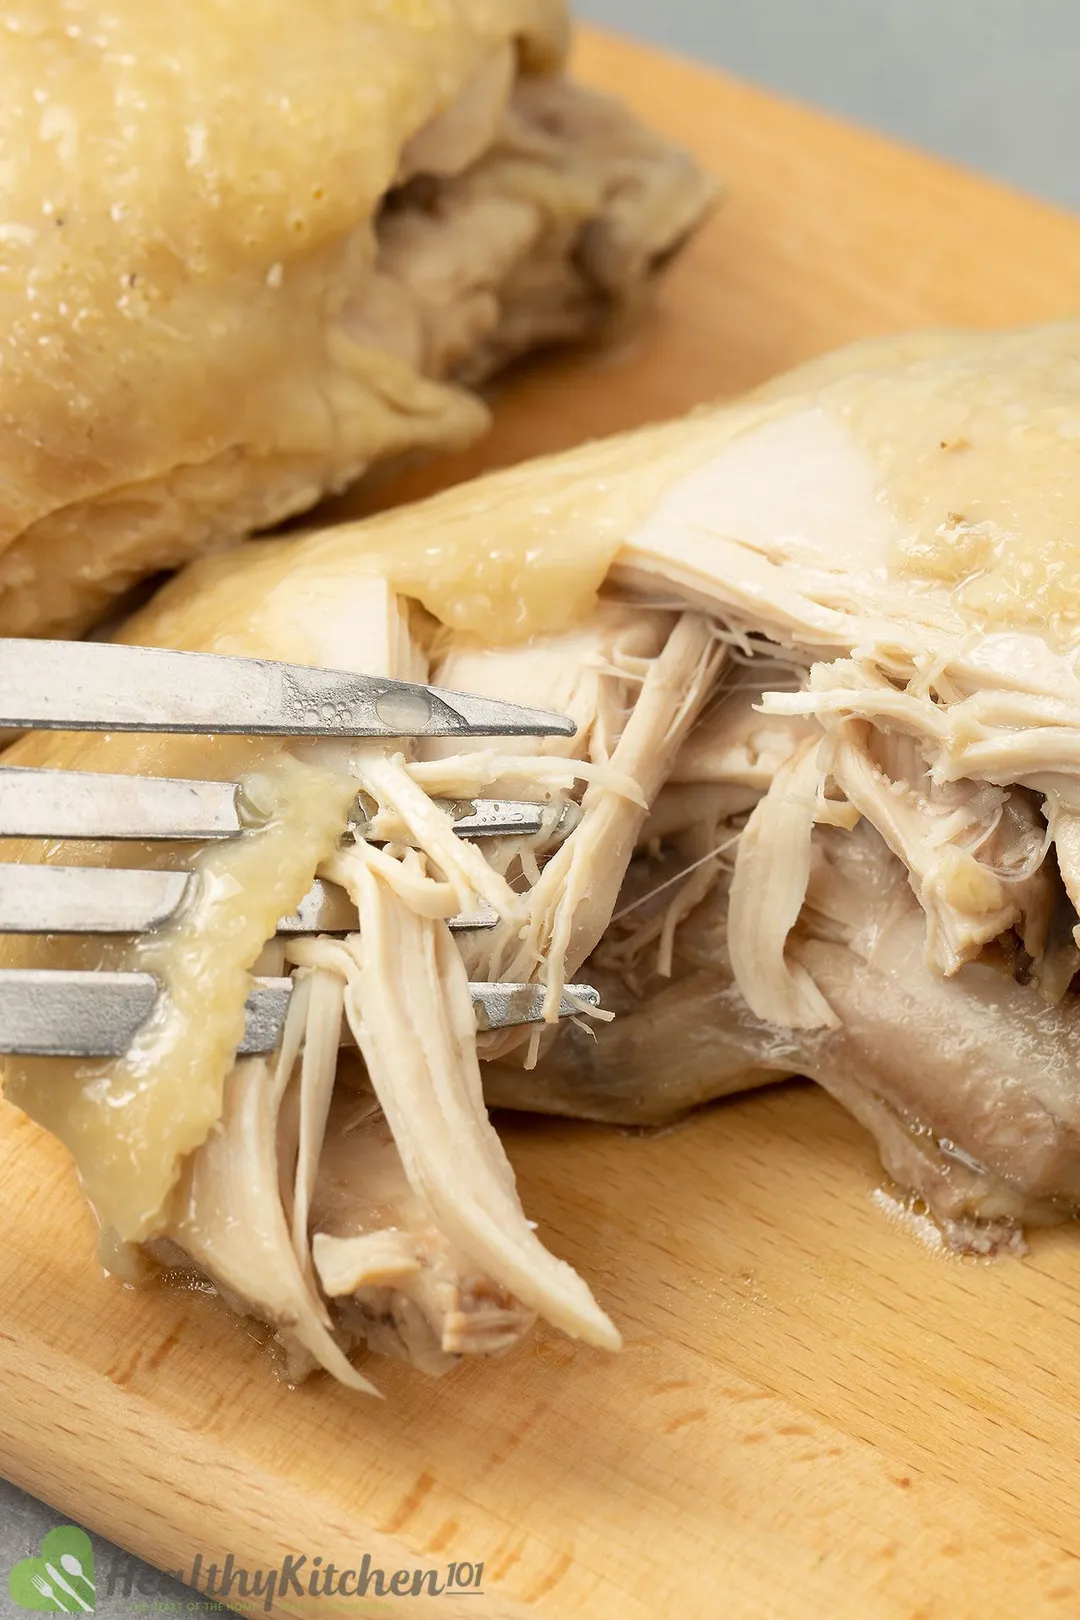 Is Boiled Chicken Healthy